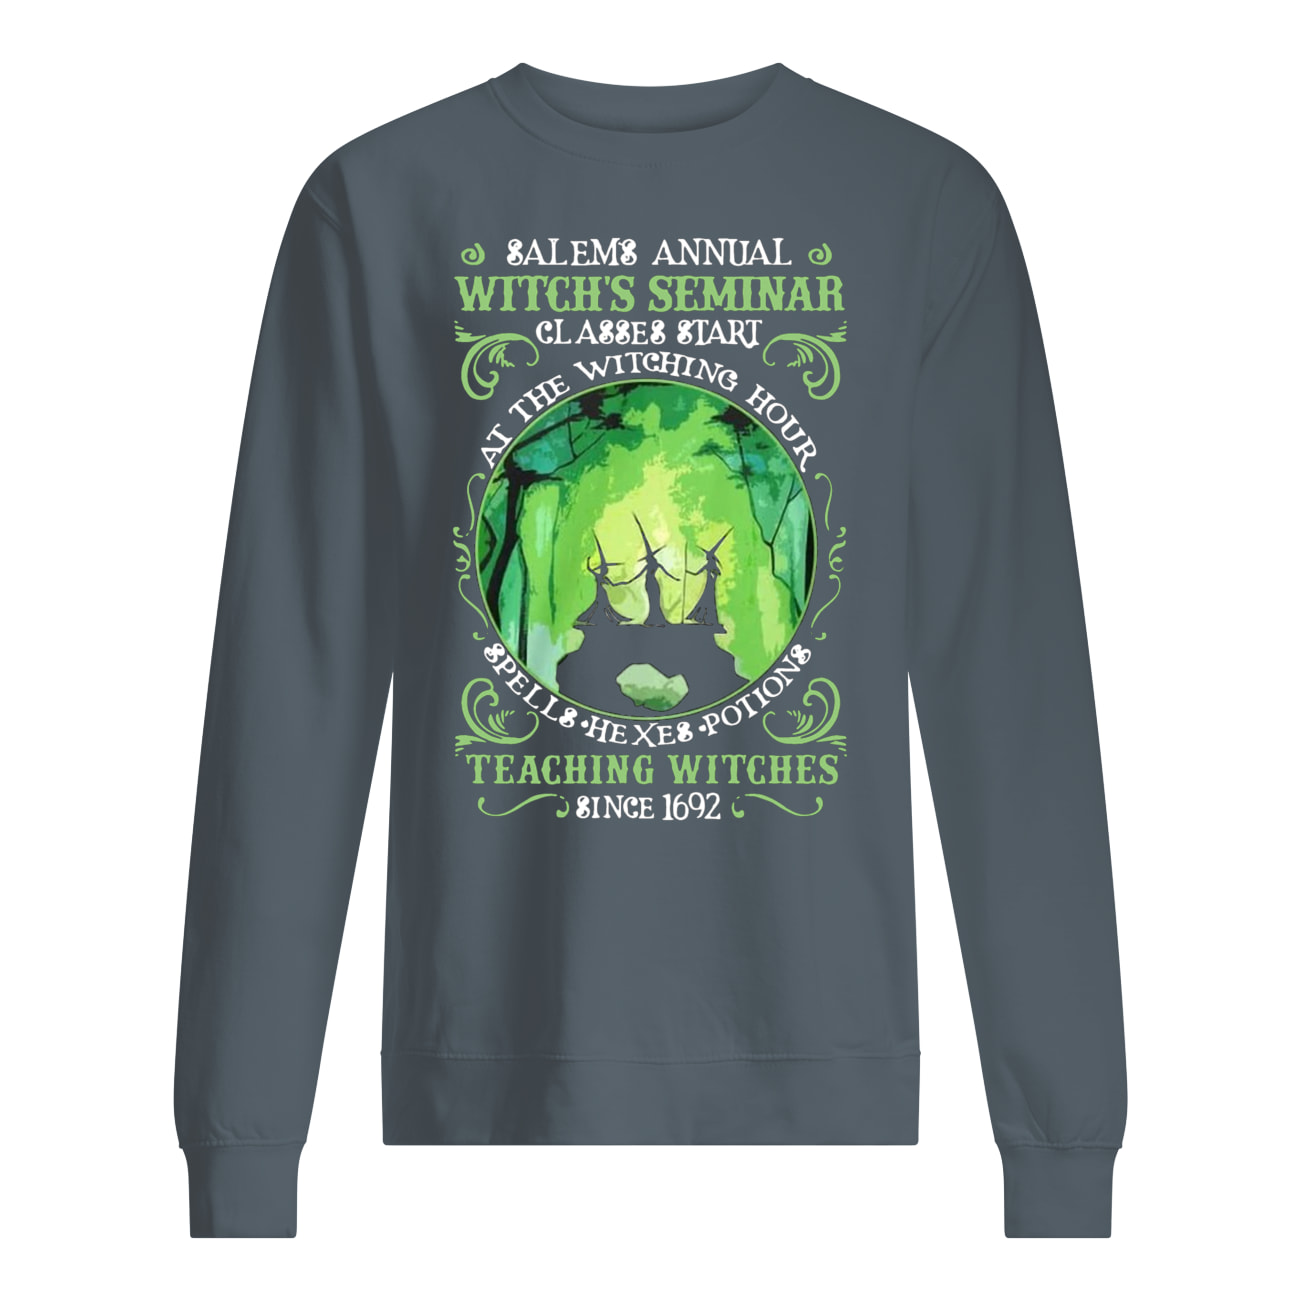 Salem annual witch seminar classes start at the witching hour spells hexes potions teaching witches sine 1692 sweatshirt